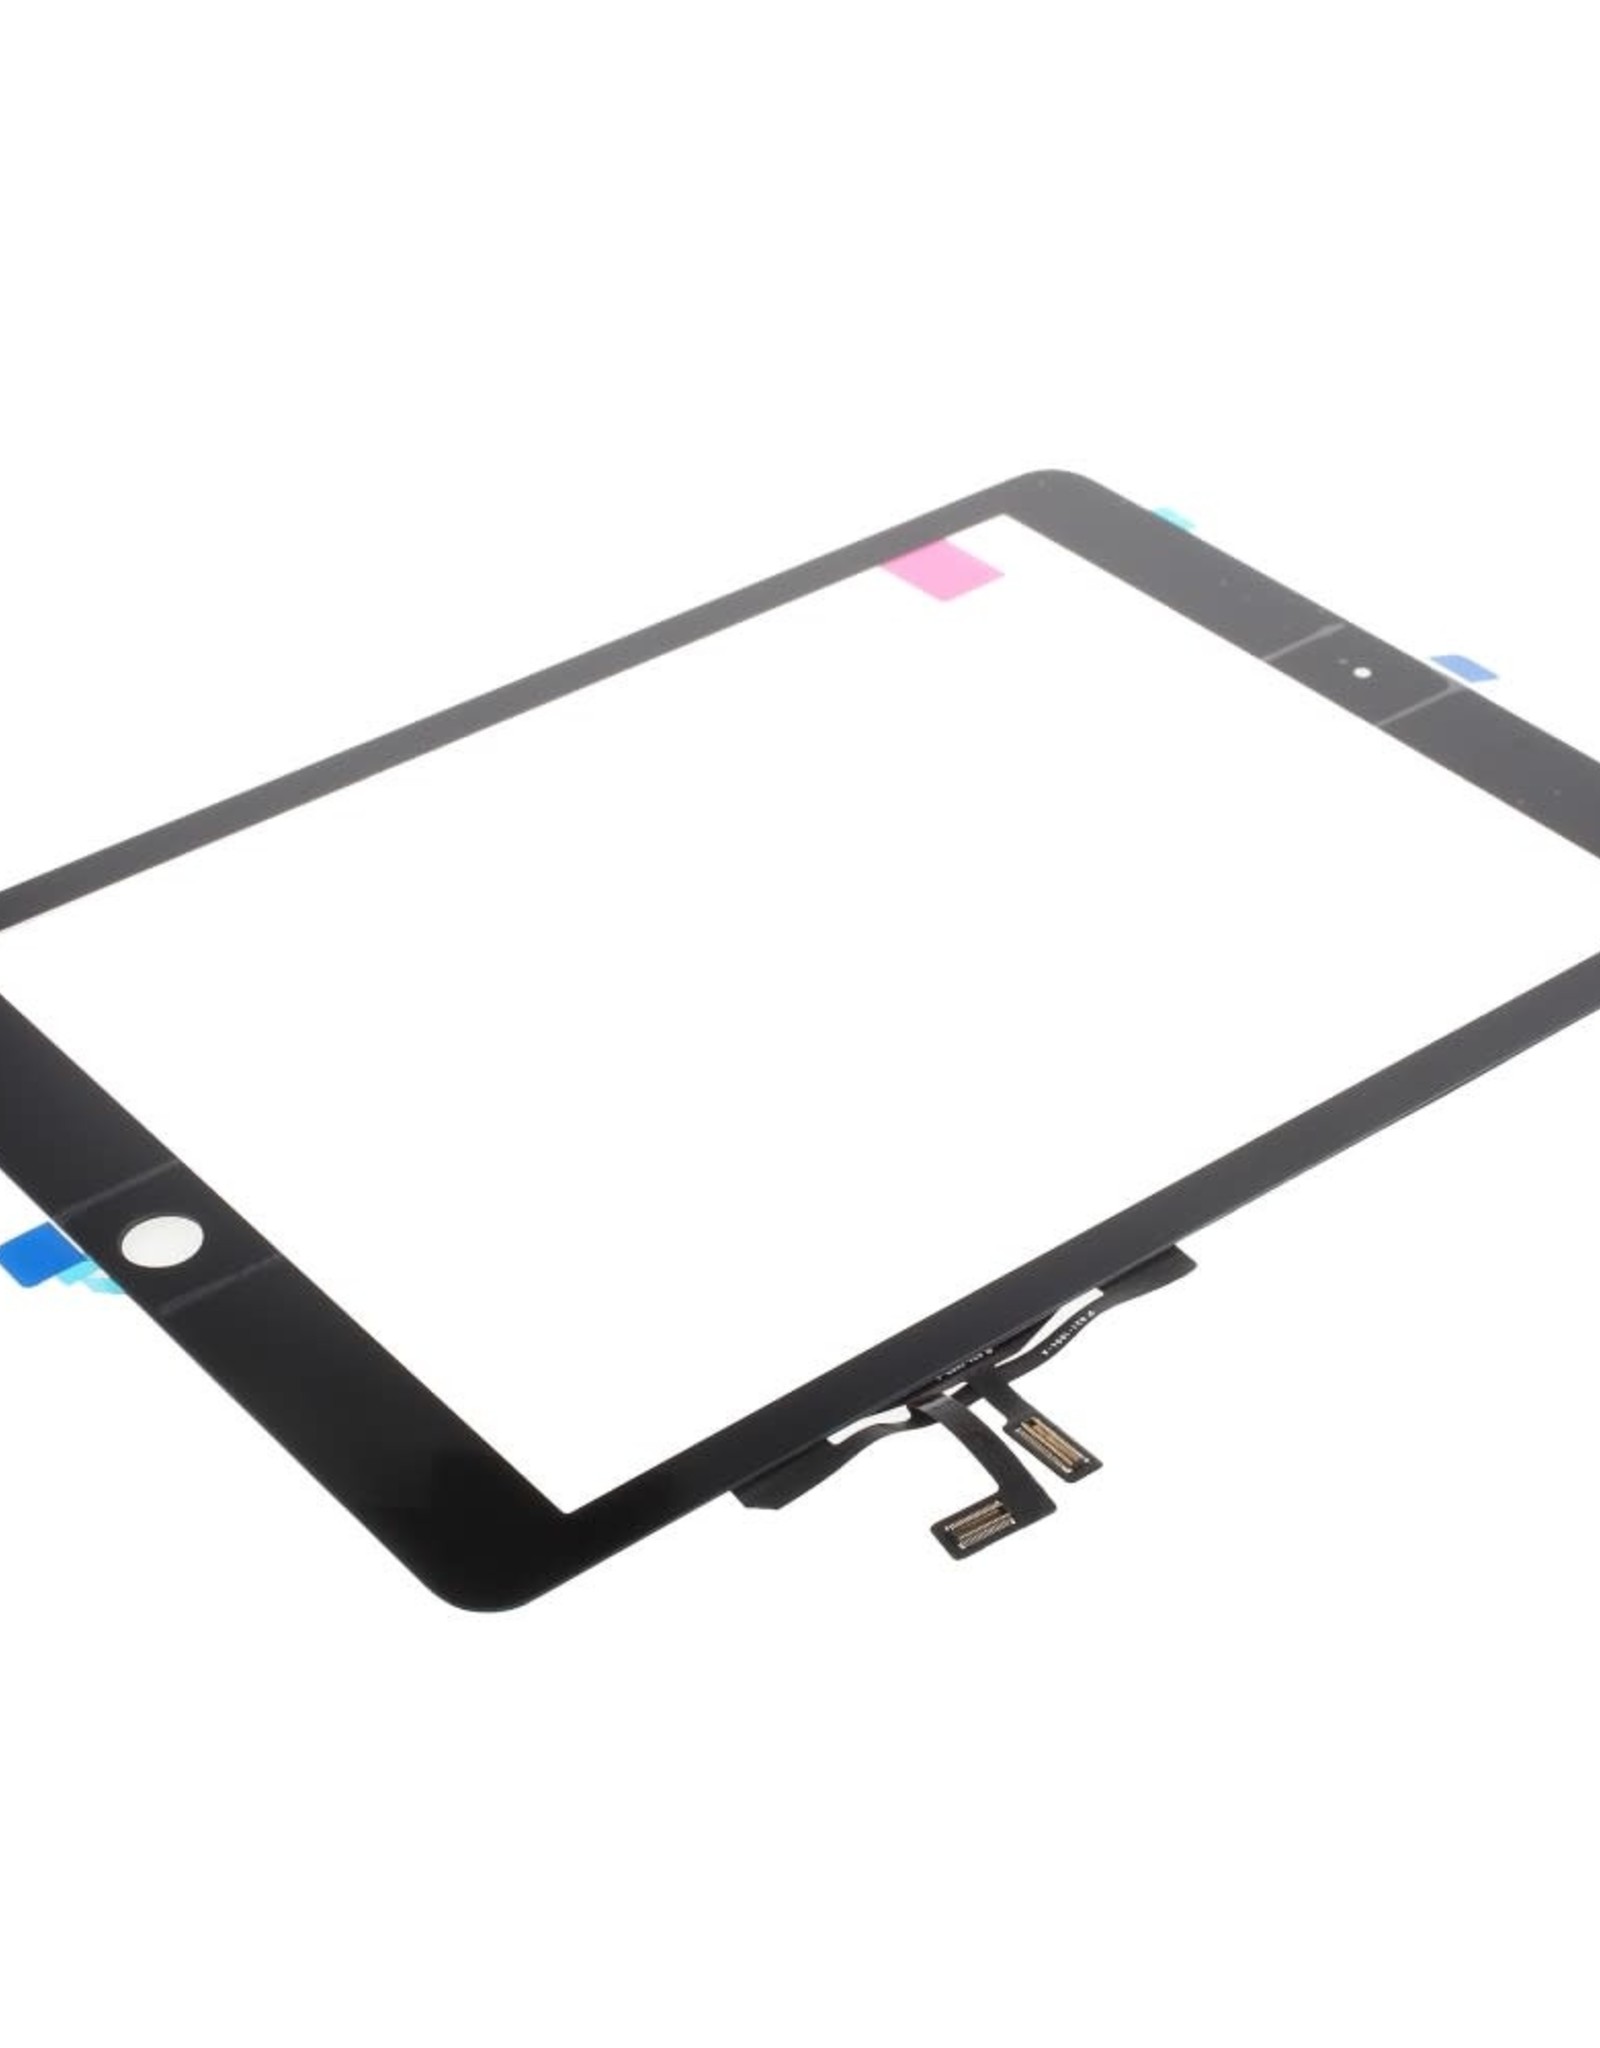 For iPad 9.7-inch (2017) 5th Gen (A1822, A1823)  OEM Touch Screen Digitizer Assembly Replacement